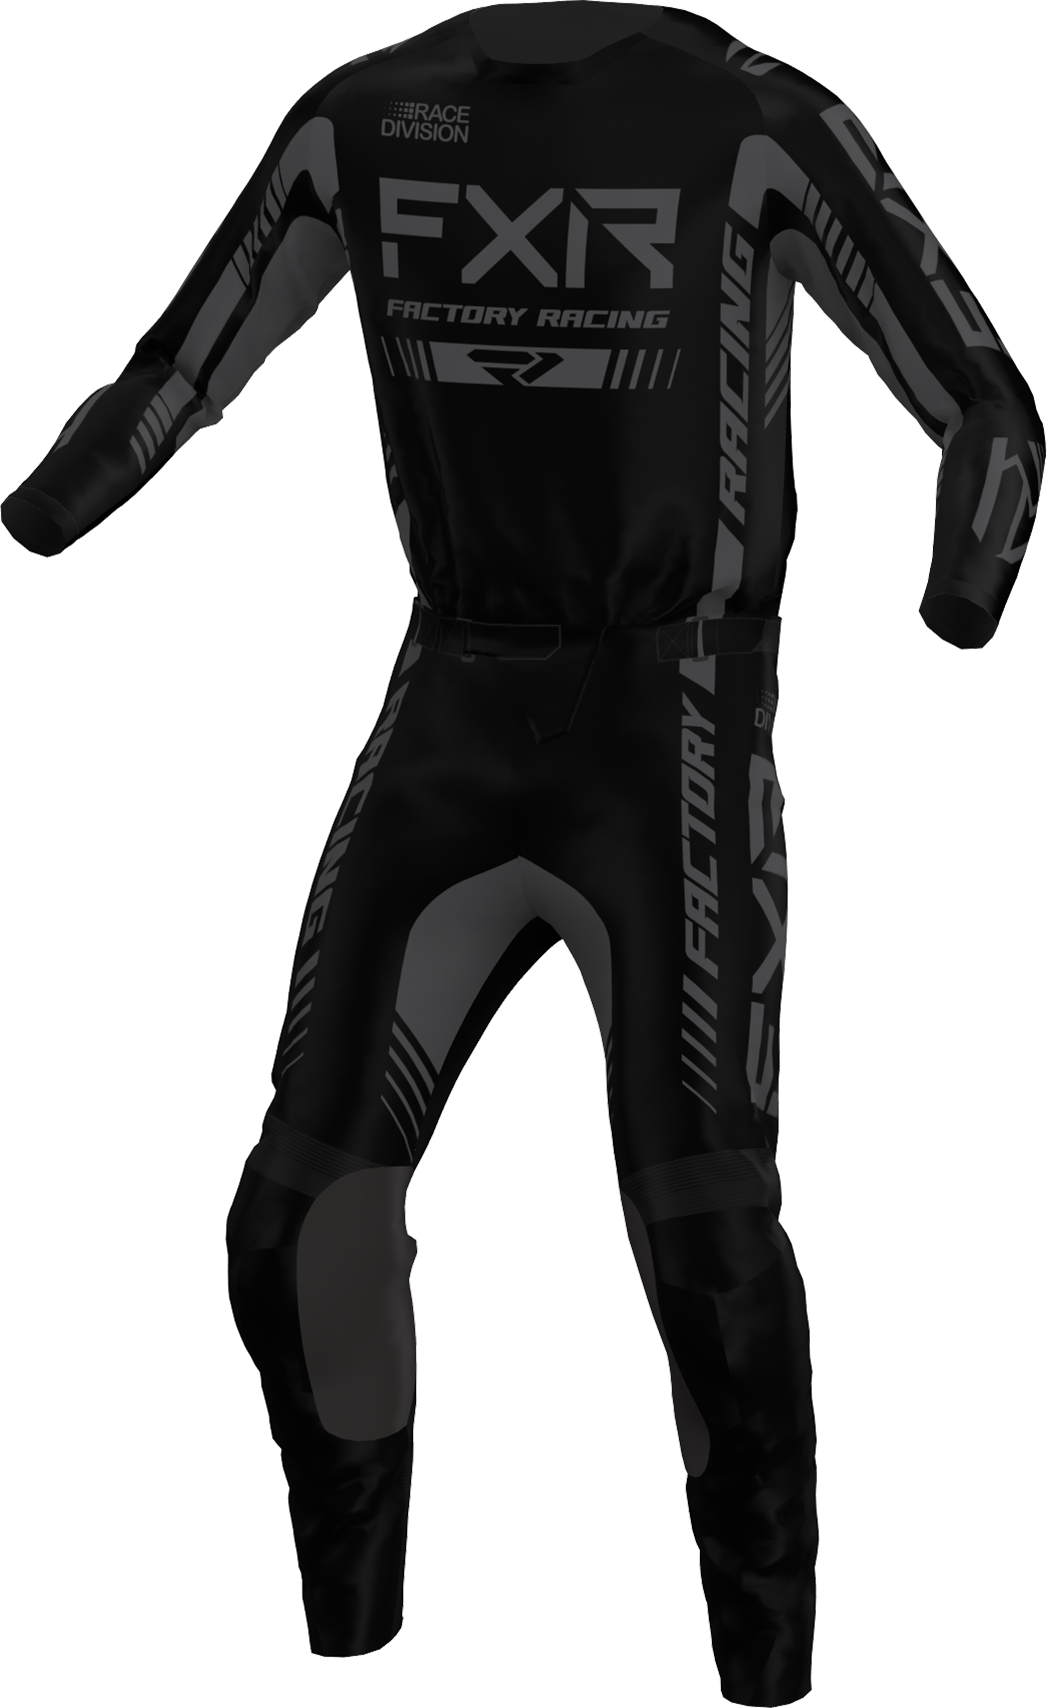 A 3D image of FXR's Clutch Pro MX Jersey and Pant in Black Ops colorway